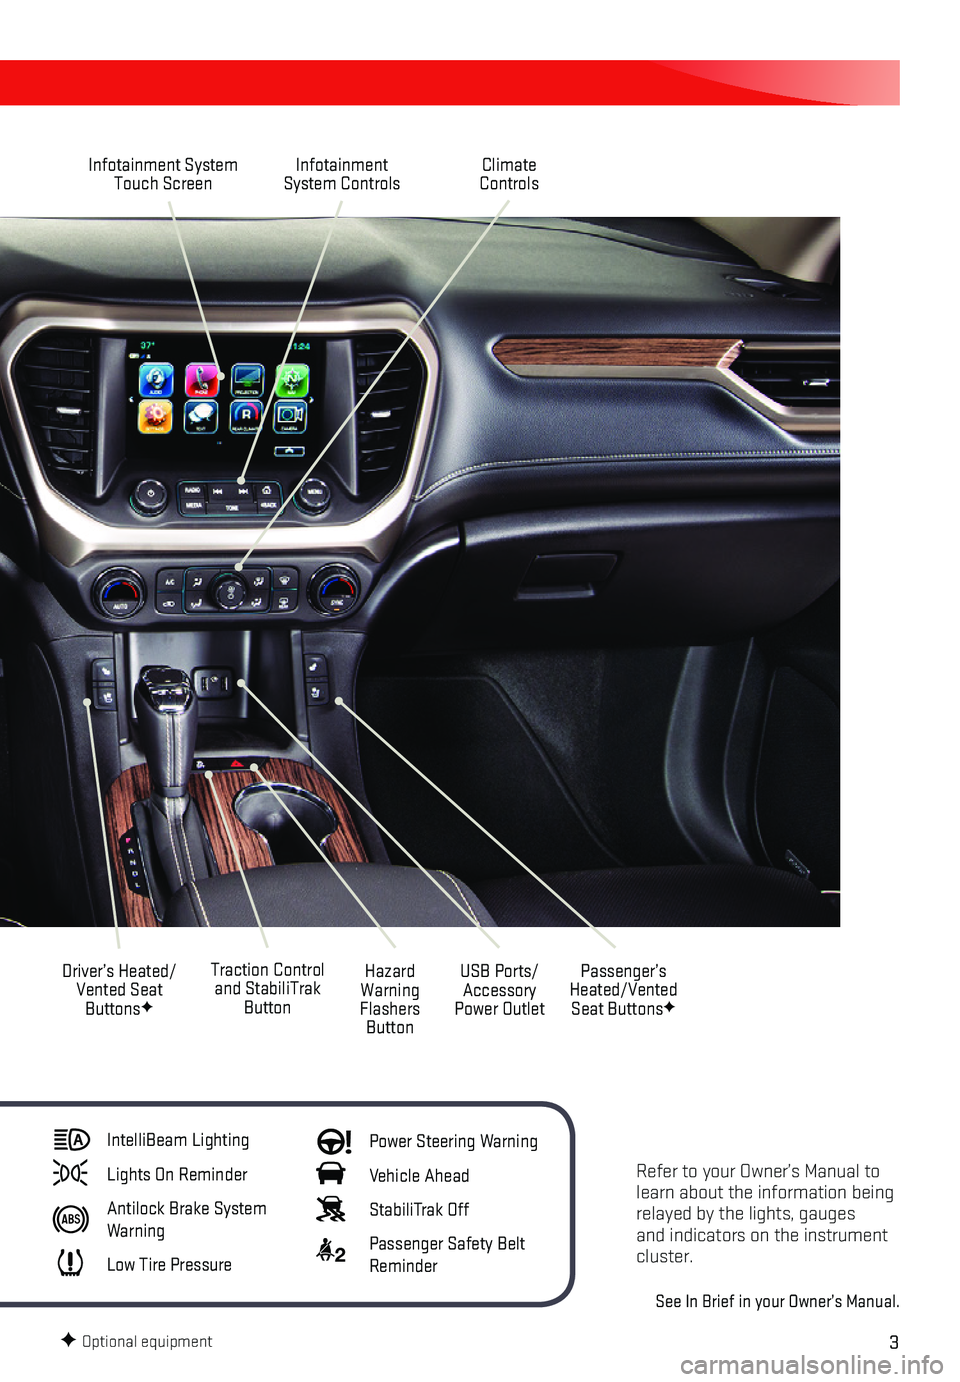 GMC ACADIA 2018  Get To Know Guide 3
Refer to your Owner’s Manual to learn about the information being relayed by the lights, gauges and indicators on the instrument cluster.
See In Brief in your Owner’s Manual.
Infotainment System